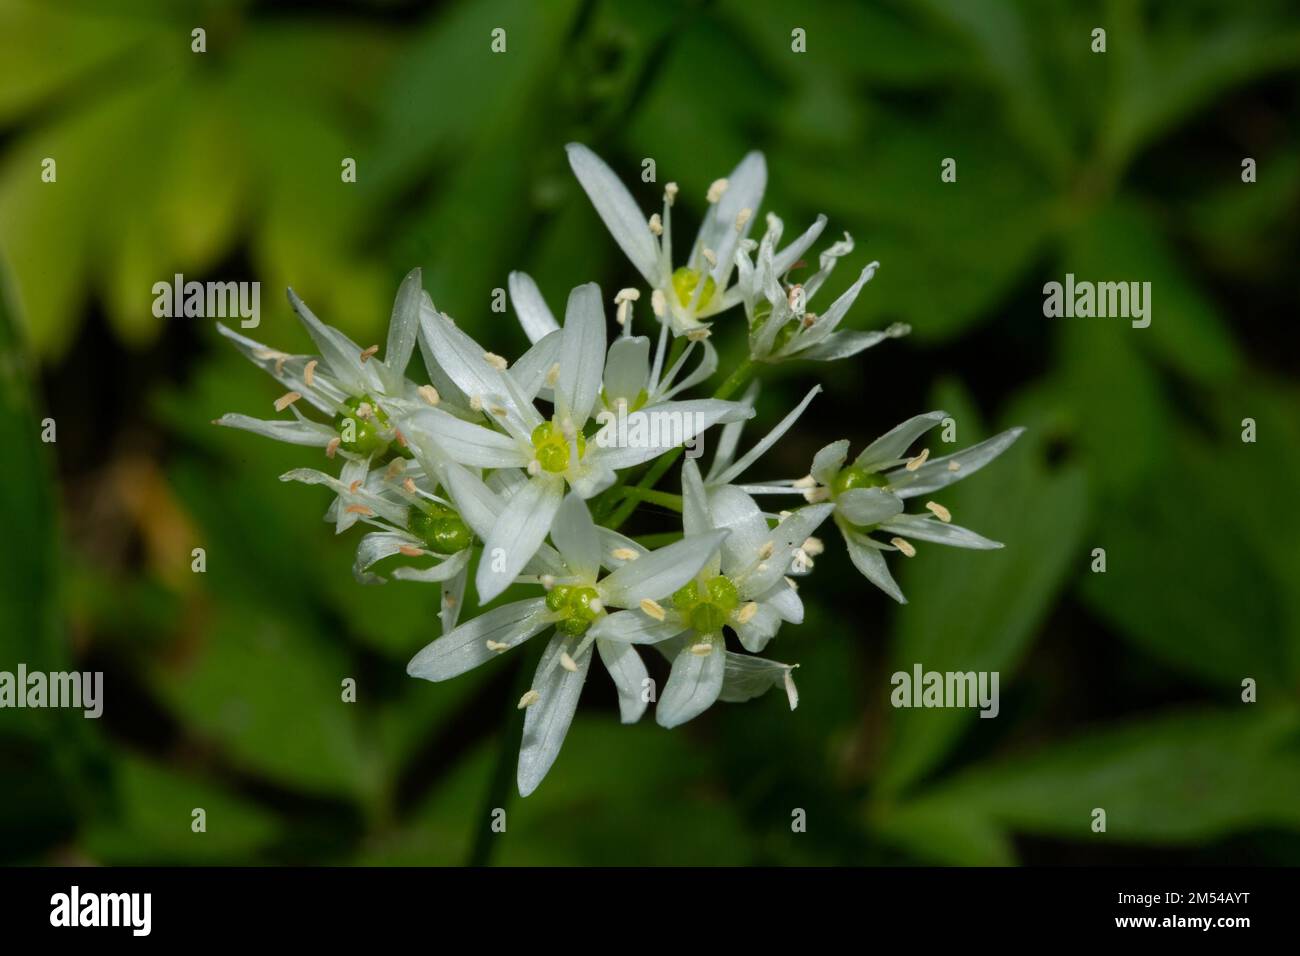 Wild garlic flower panicle with a few white open flowers Stock Photo